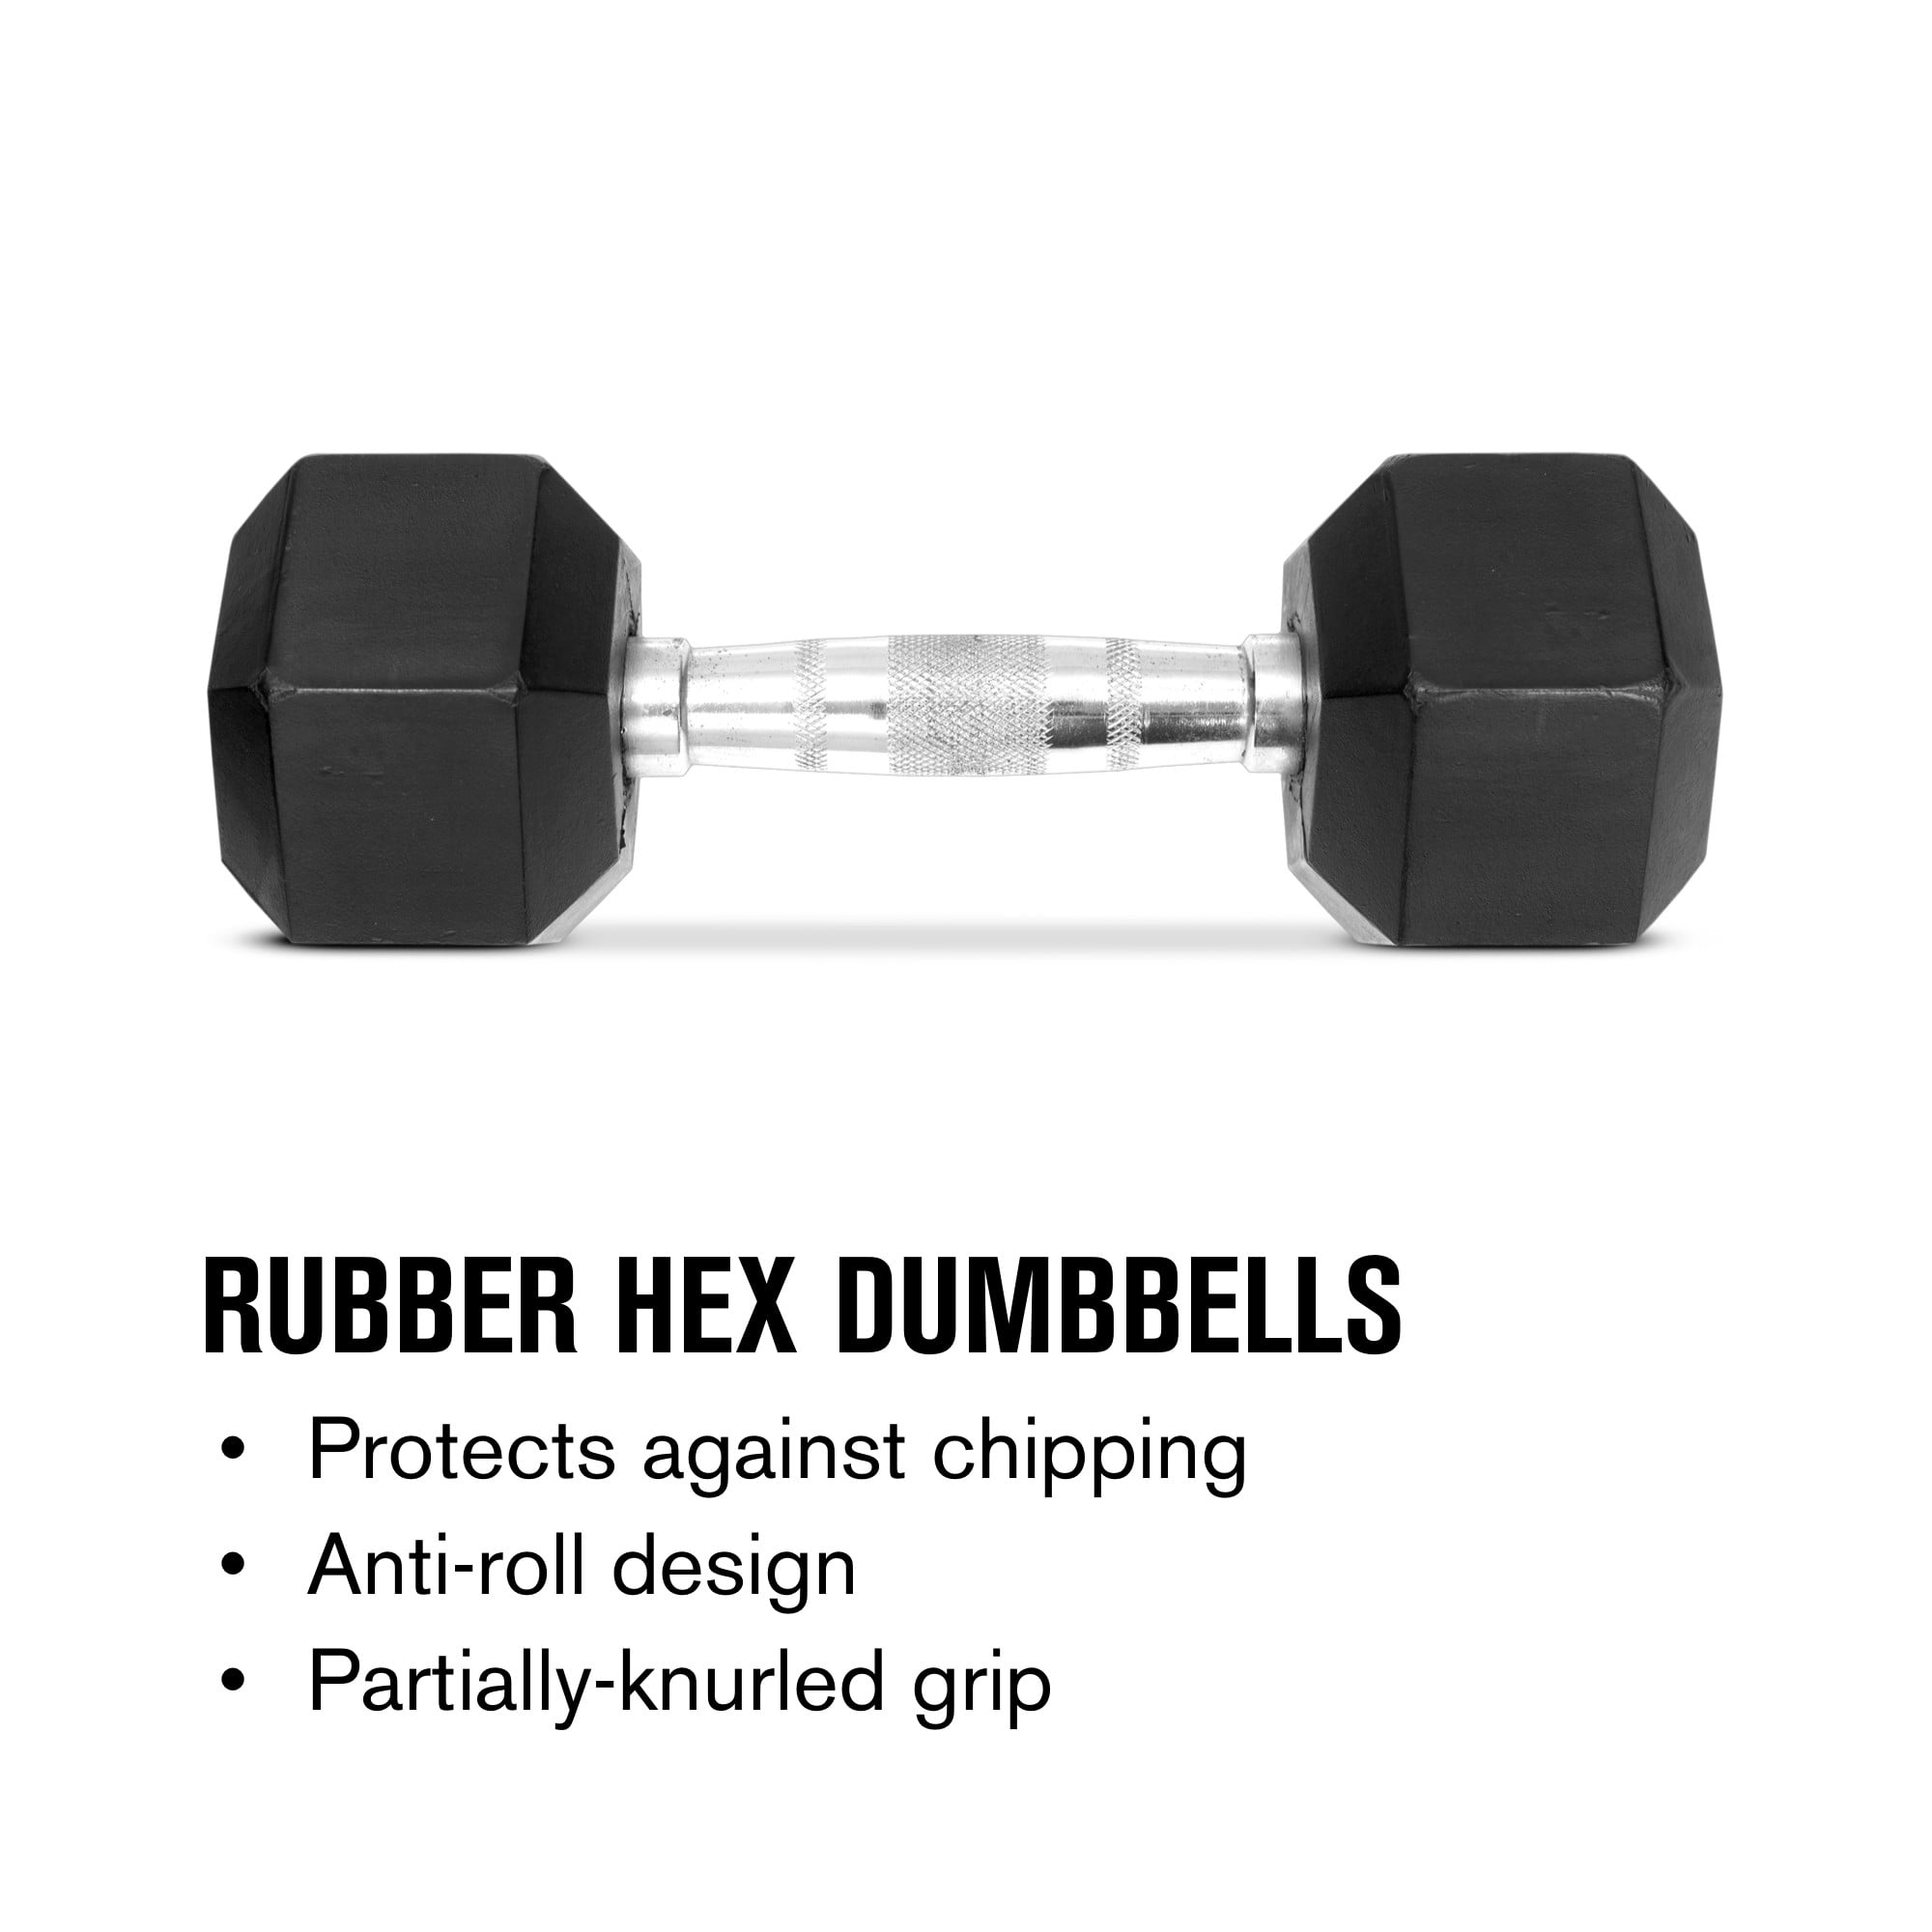 35LB Pair Of CAP Rubber Coated Hex Dumbells 70lbs Total Weight Weider FREE SHIP“ 